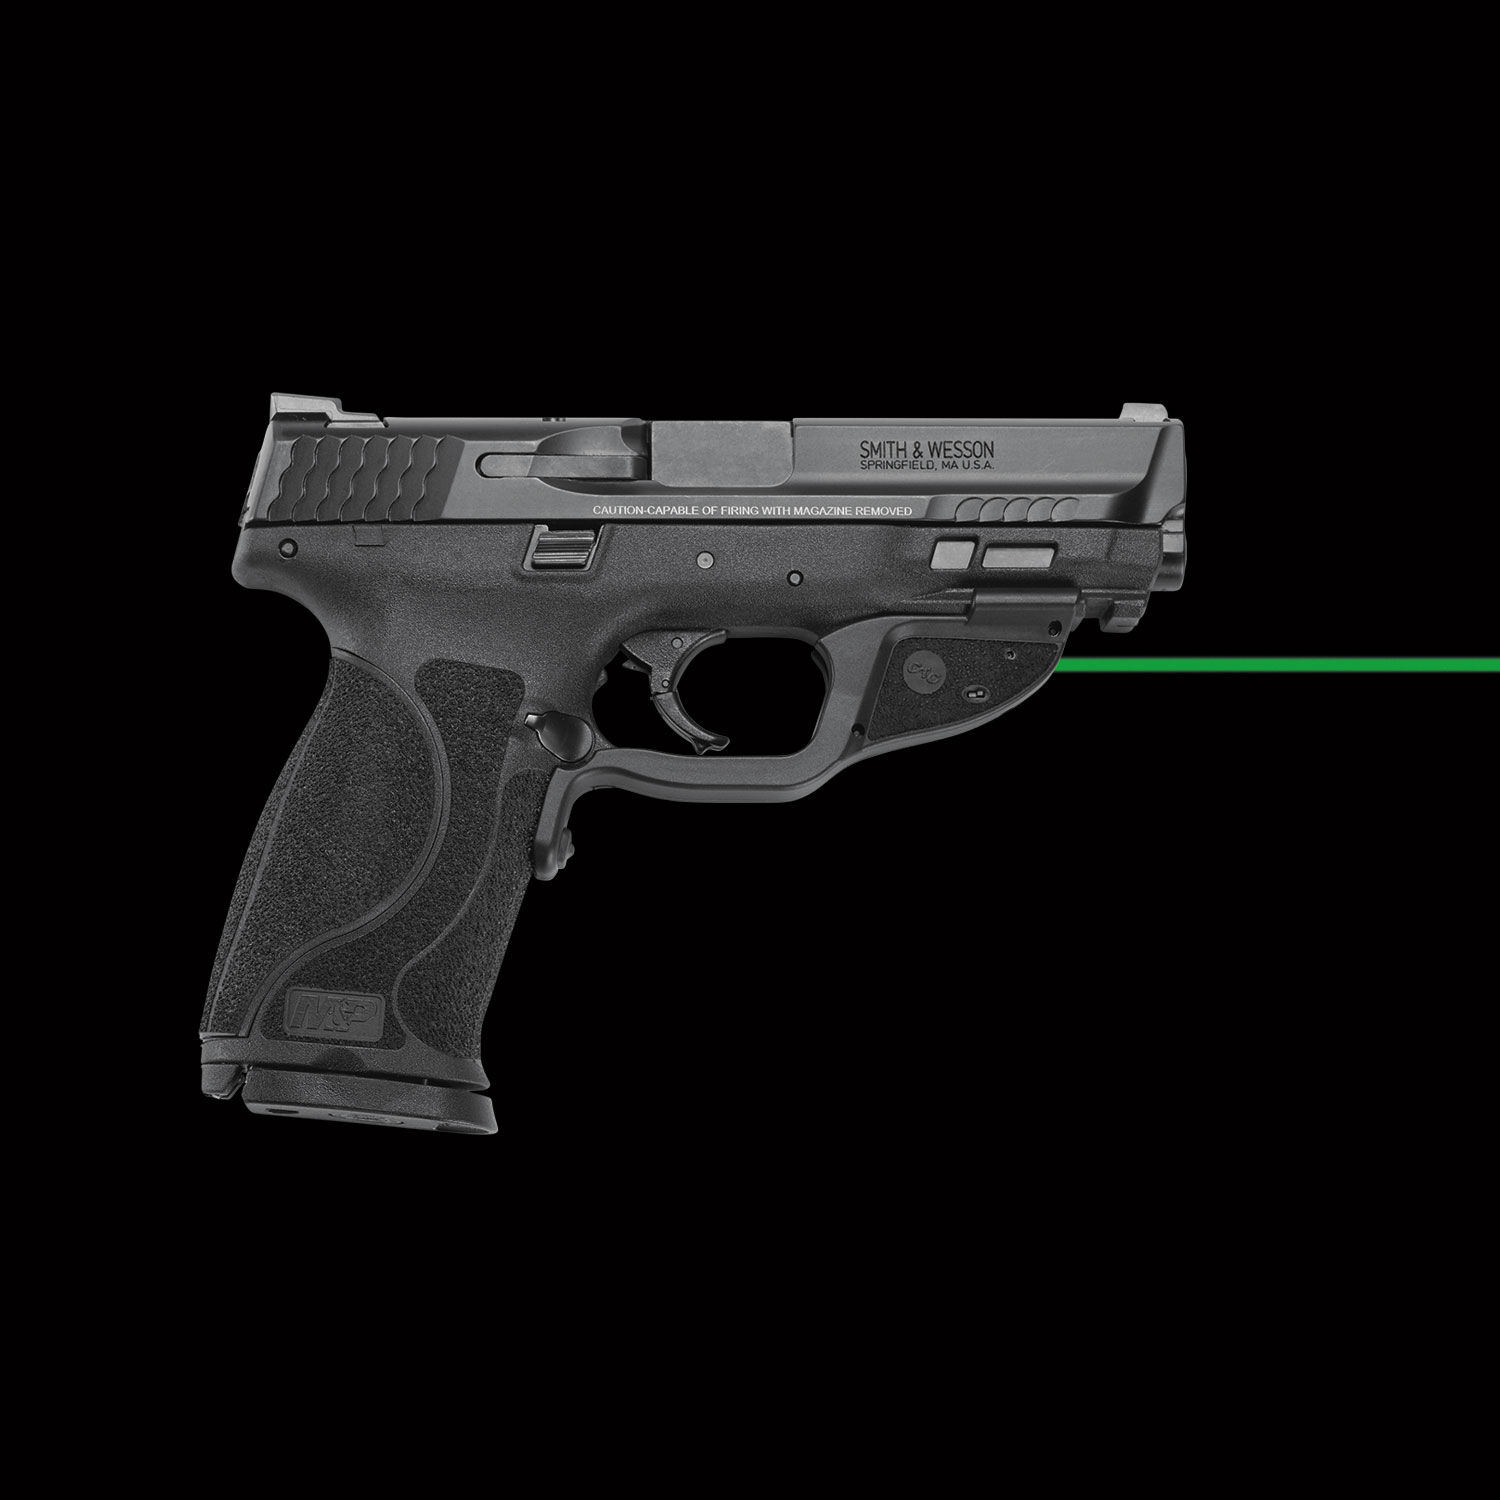 and Subcompact for sale online Compact Crimson Trace LG-362G for Smith & Wesson M&P M2.0 Full-Size 